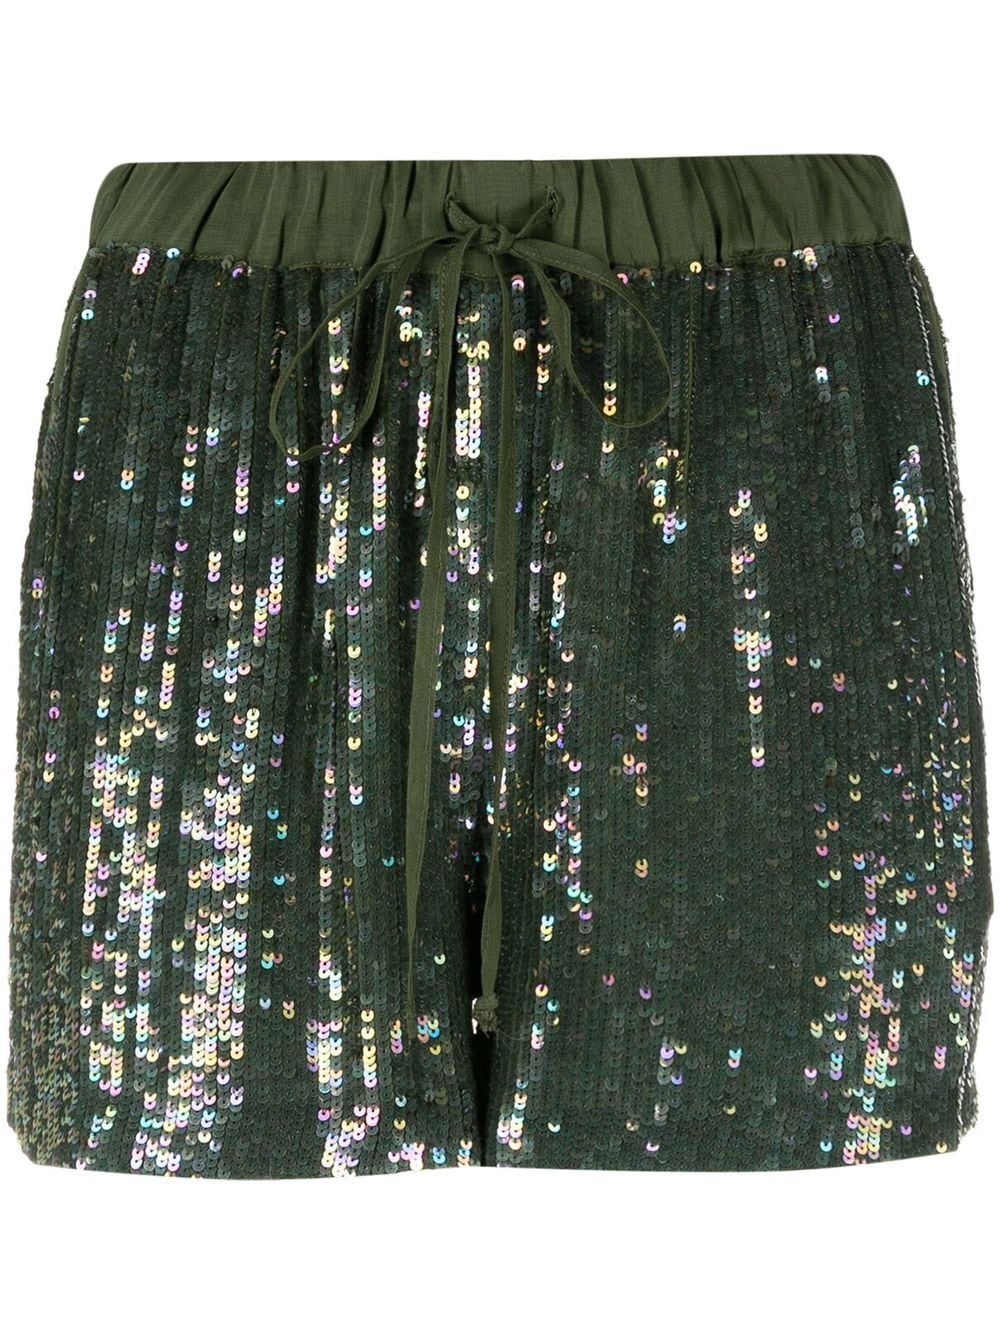 P.A.R.O.S.H. sequin-embellished shorts - Green von P.A.R.O.S.H.